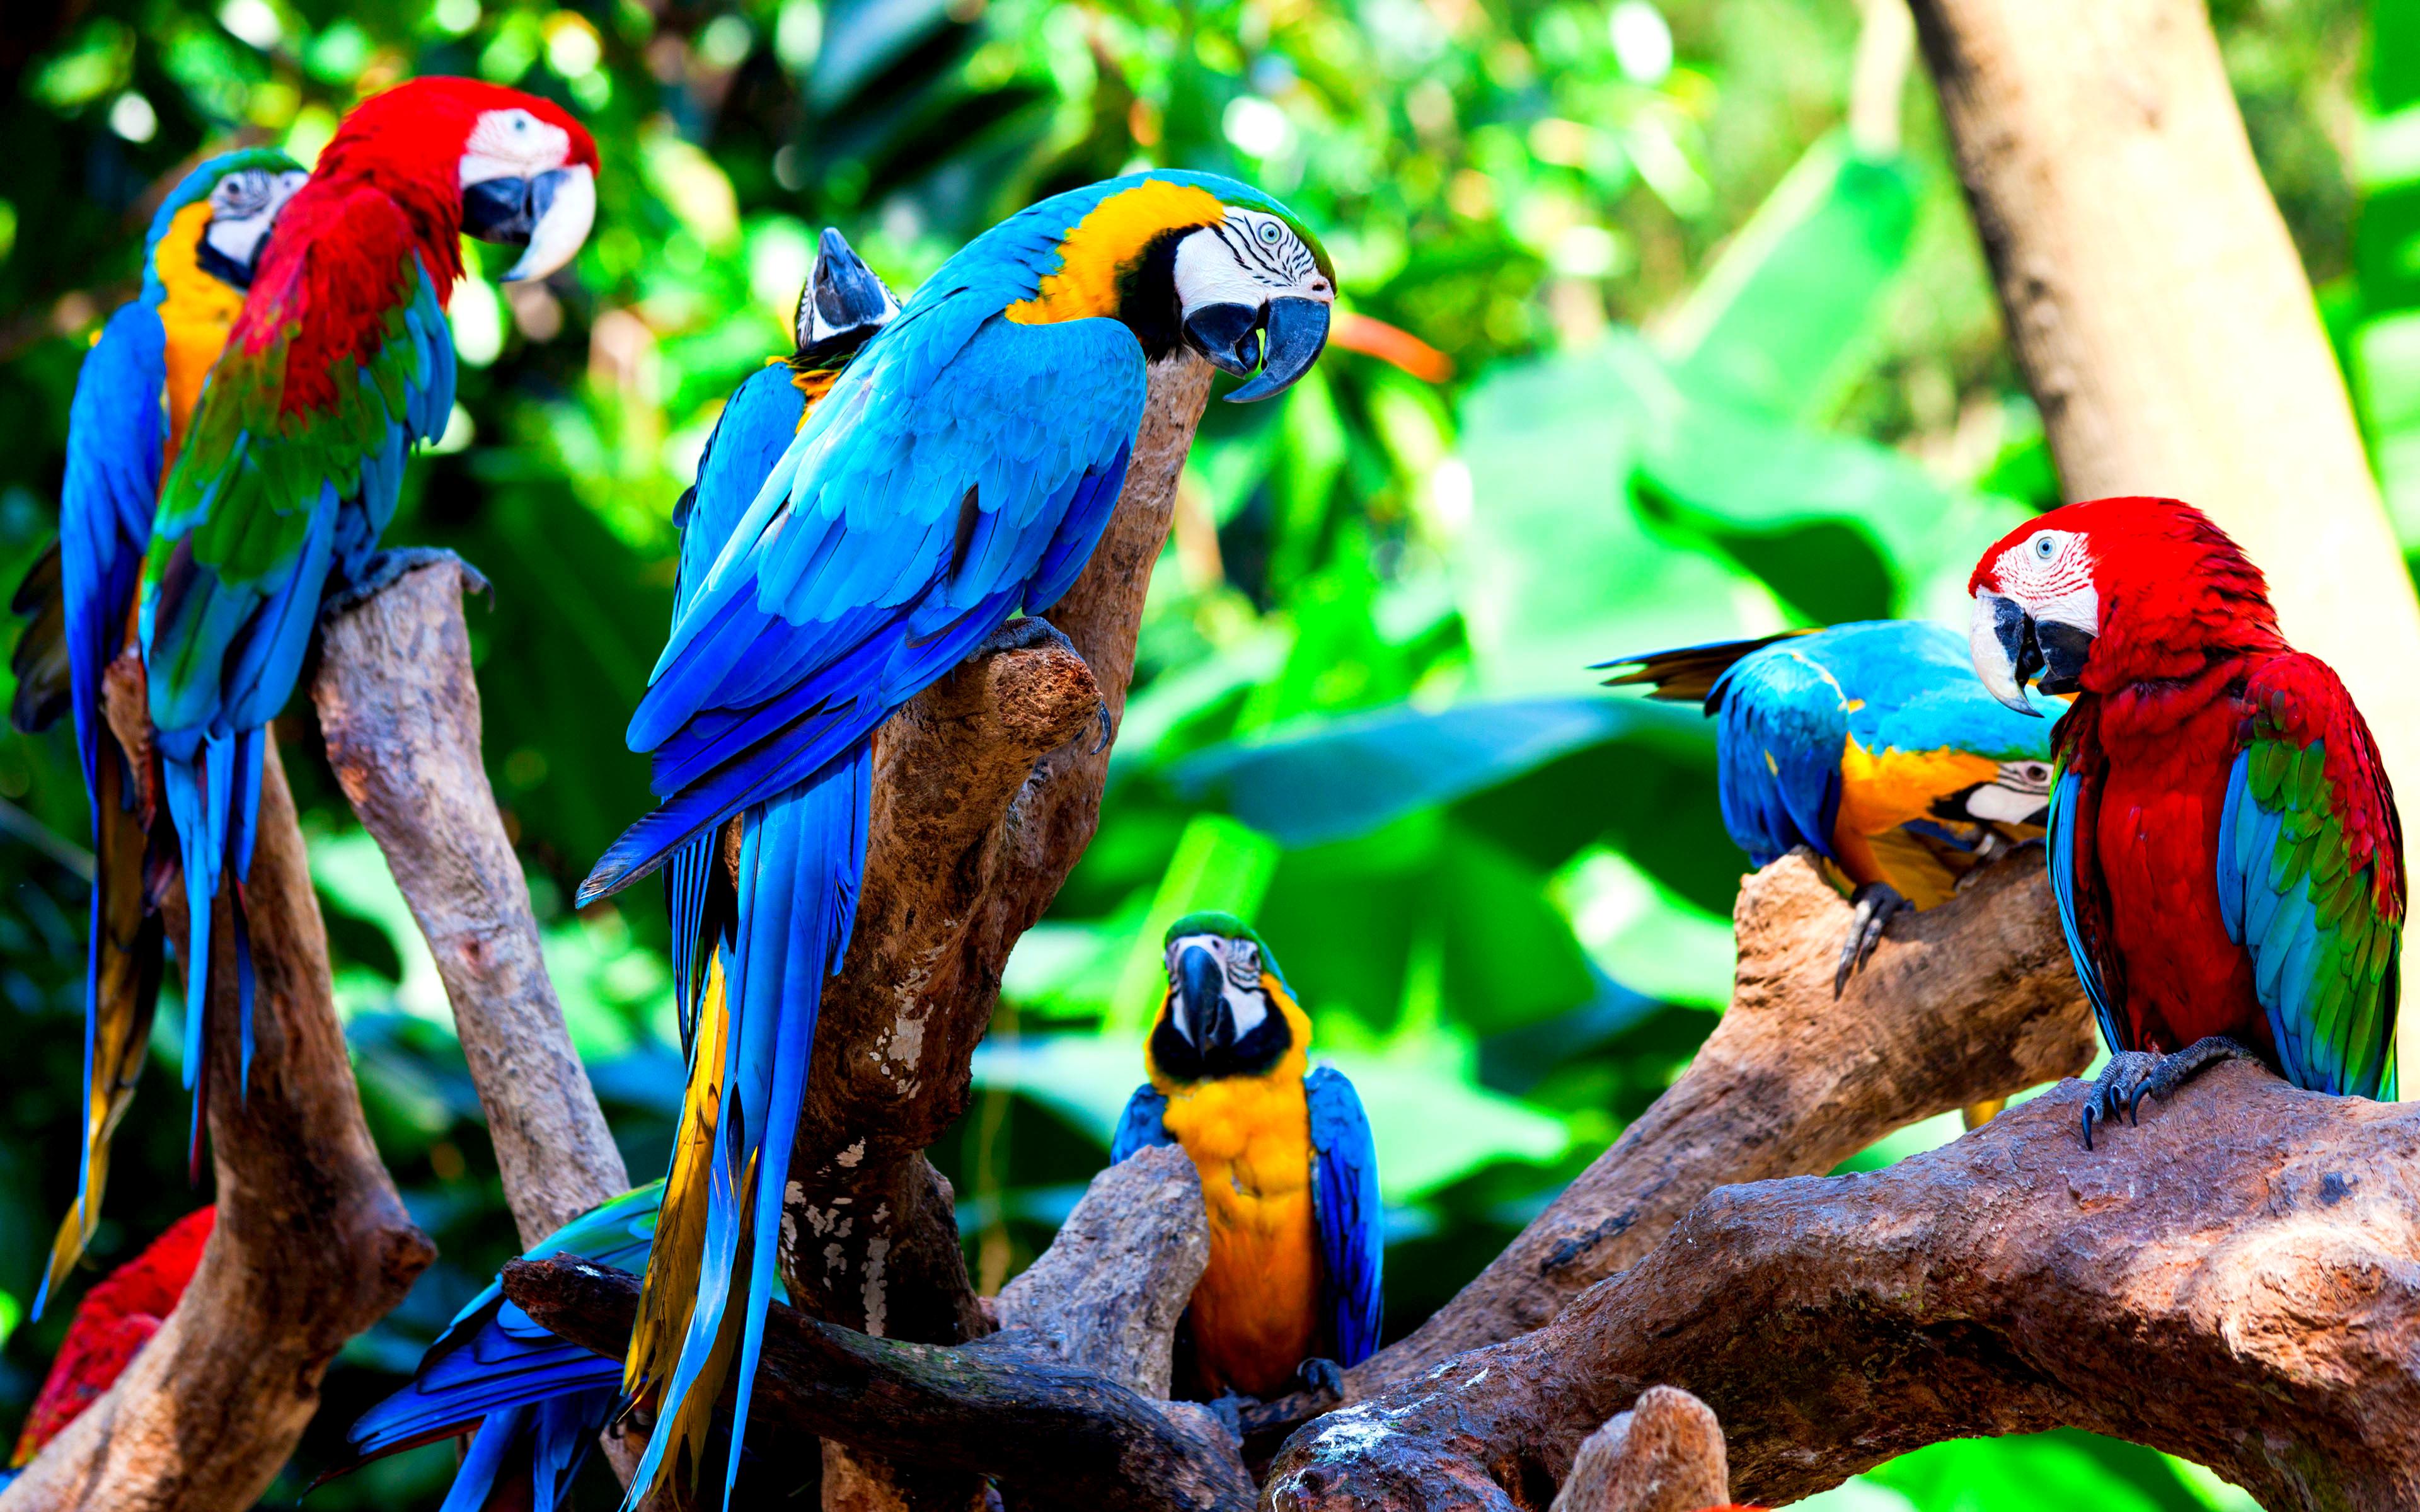 macaw, animal, bird, blue and yellow macaw, colorful, red and green macaw, birds